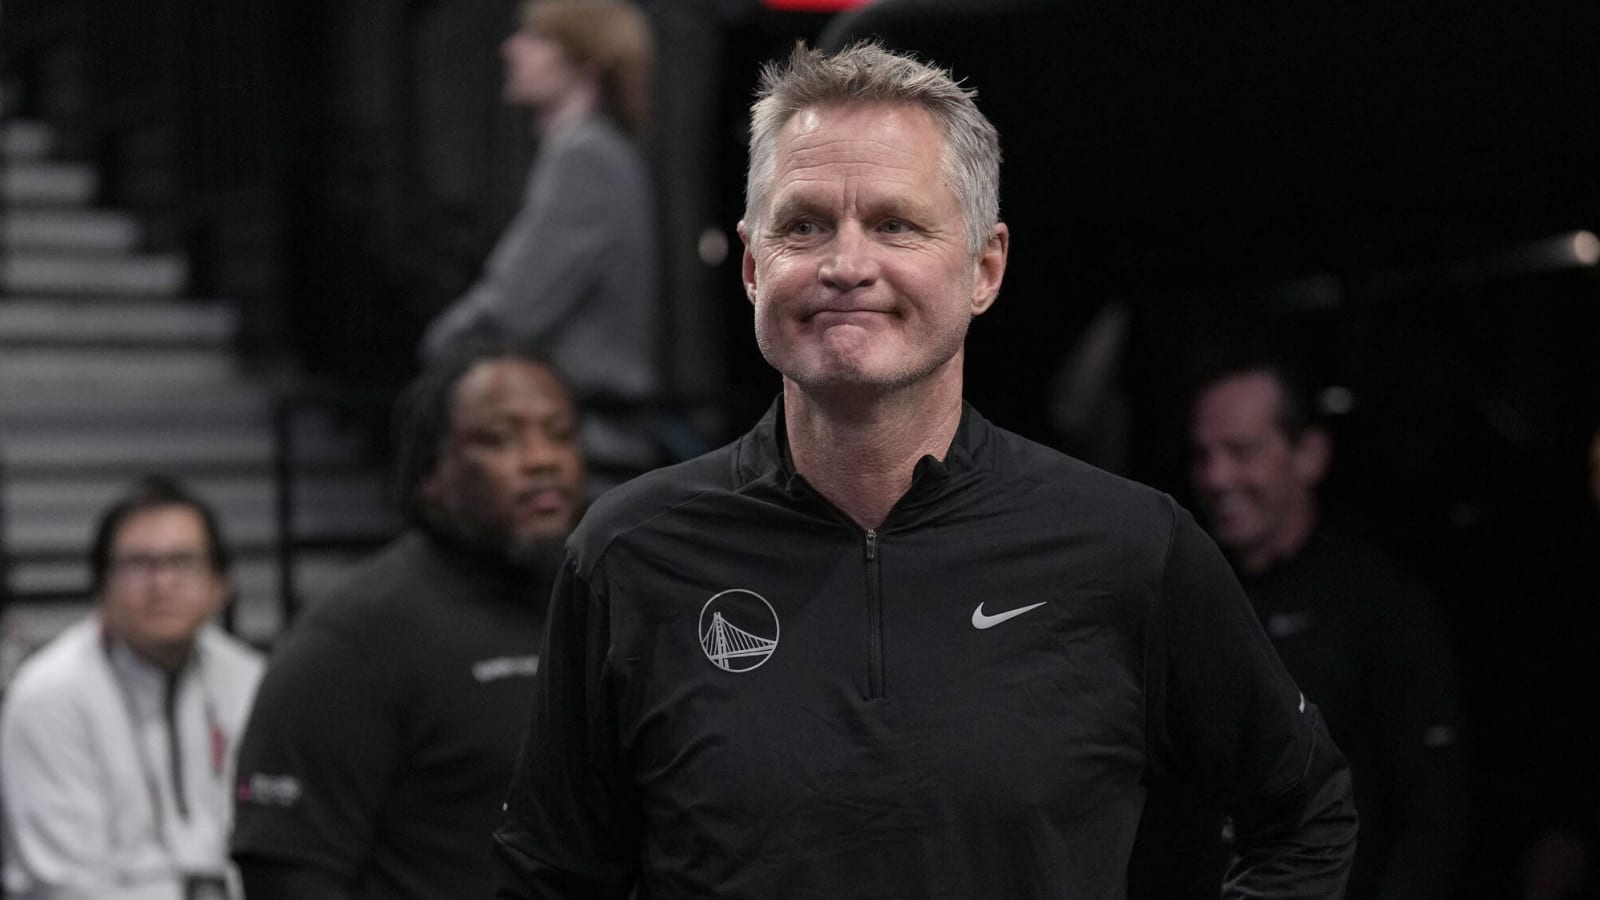 Warriors' trade deadline moves unlikely affected by Steve Kerr's contract